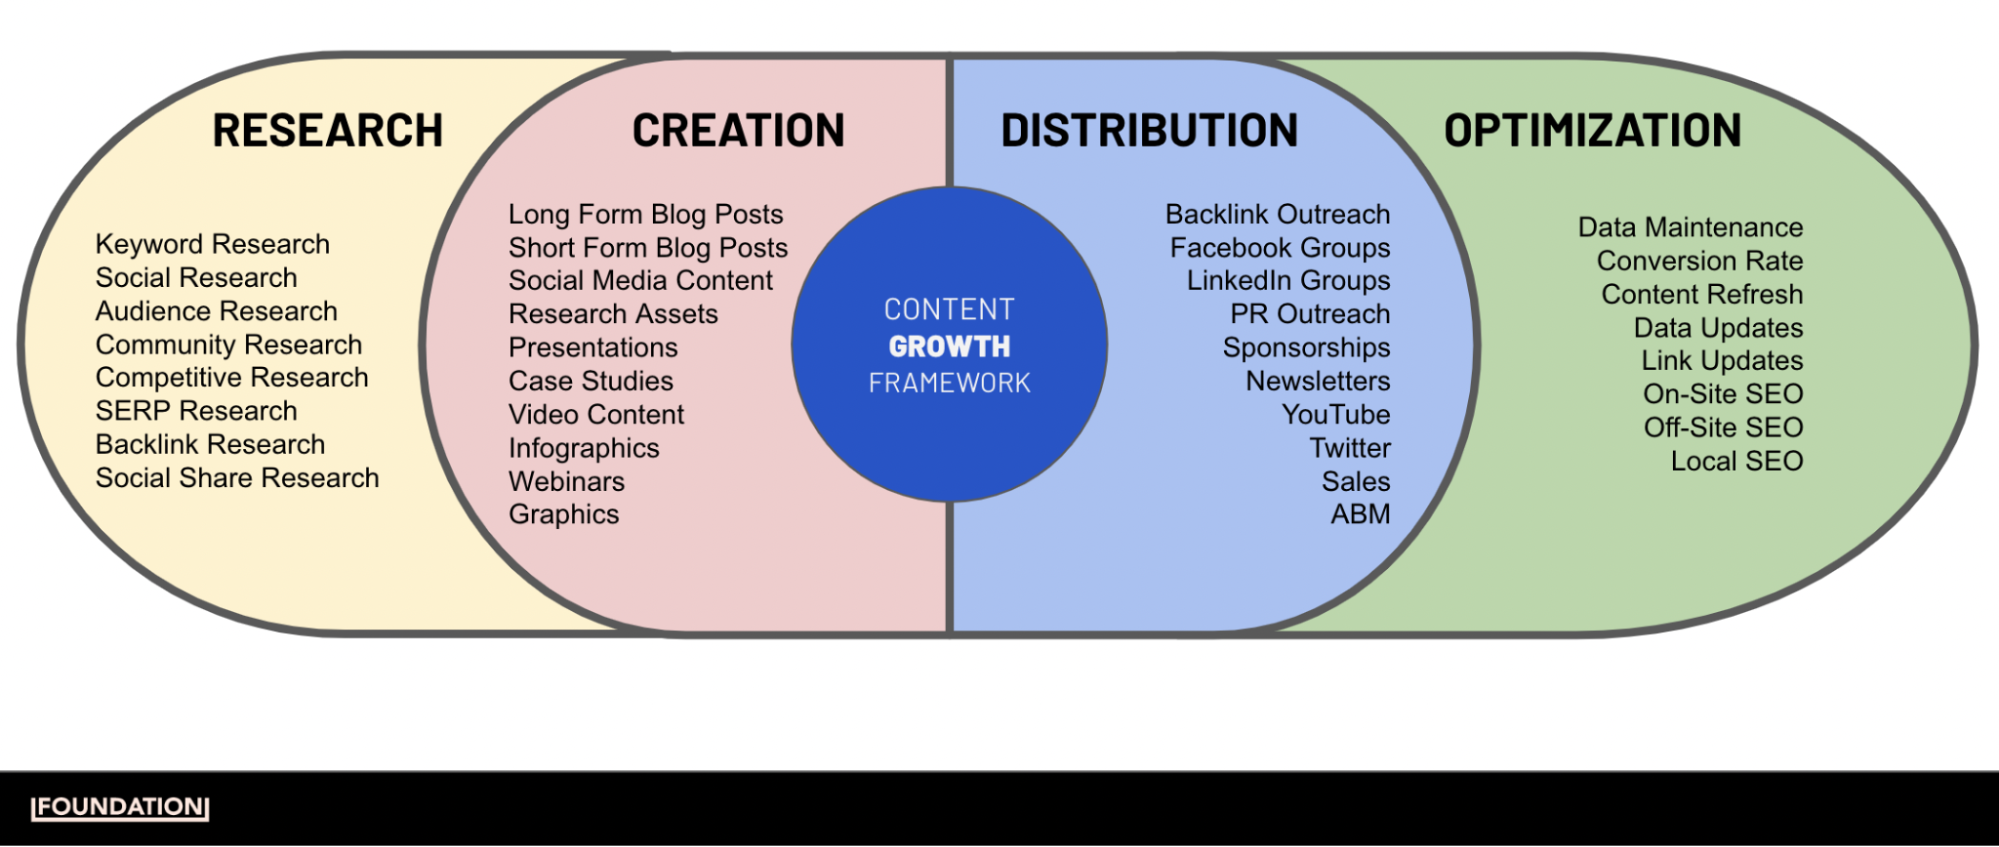 An infographic of the content growth framework